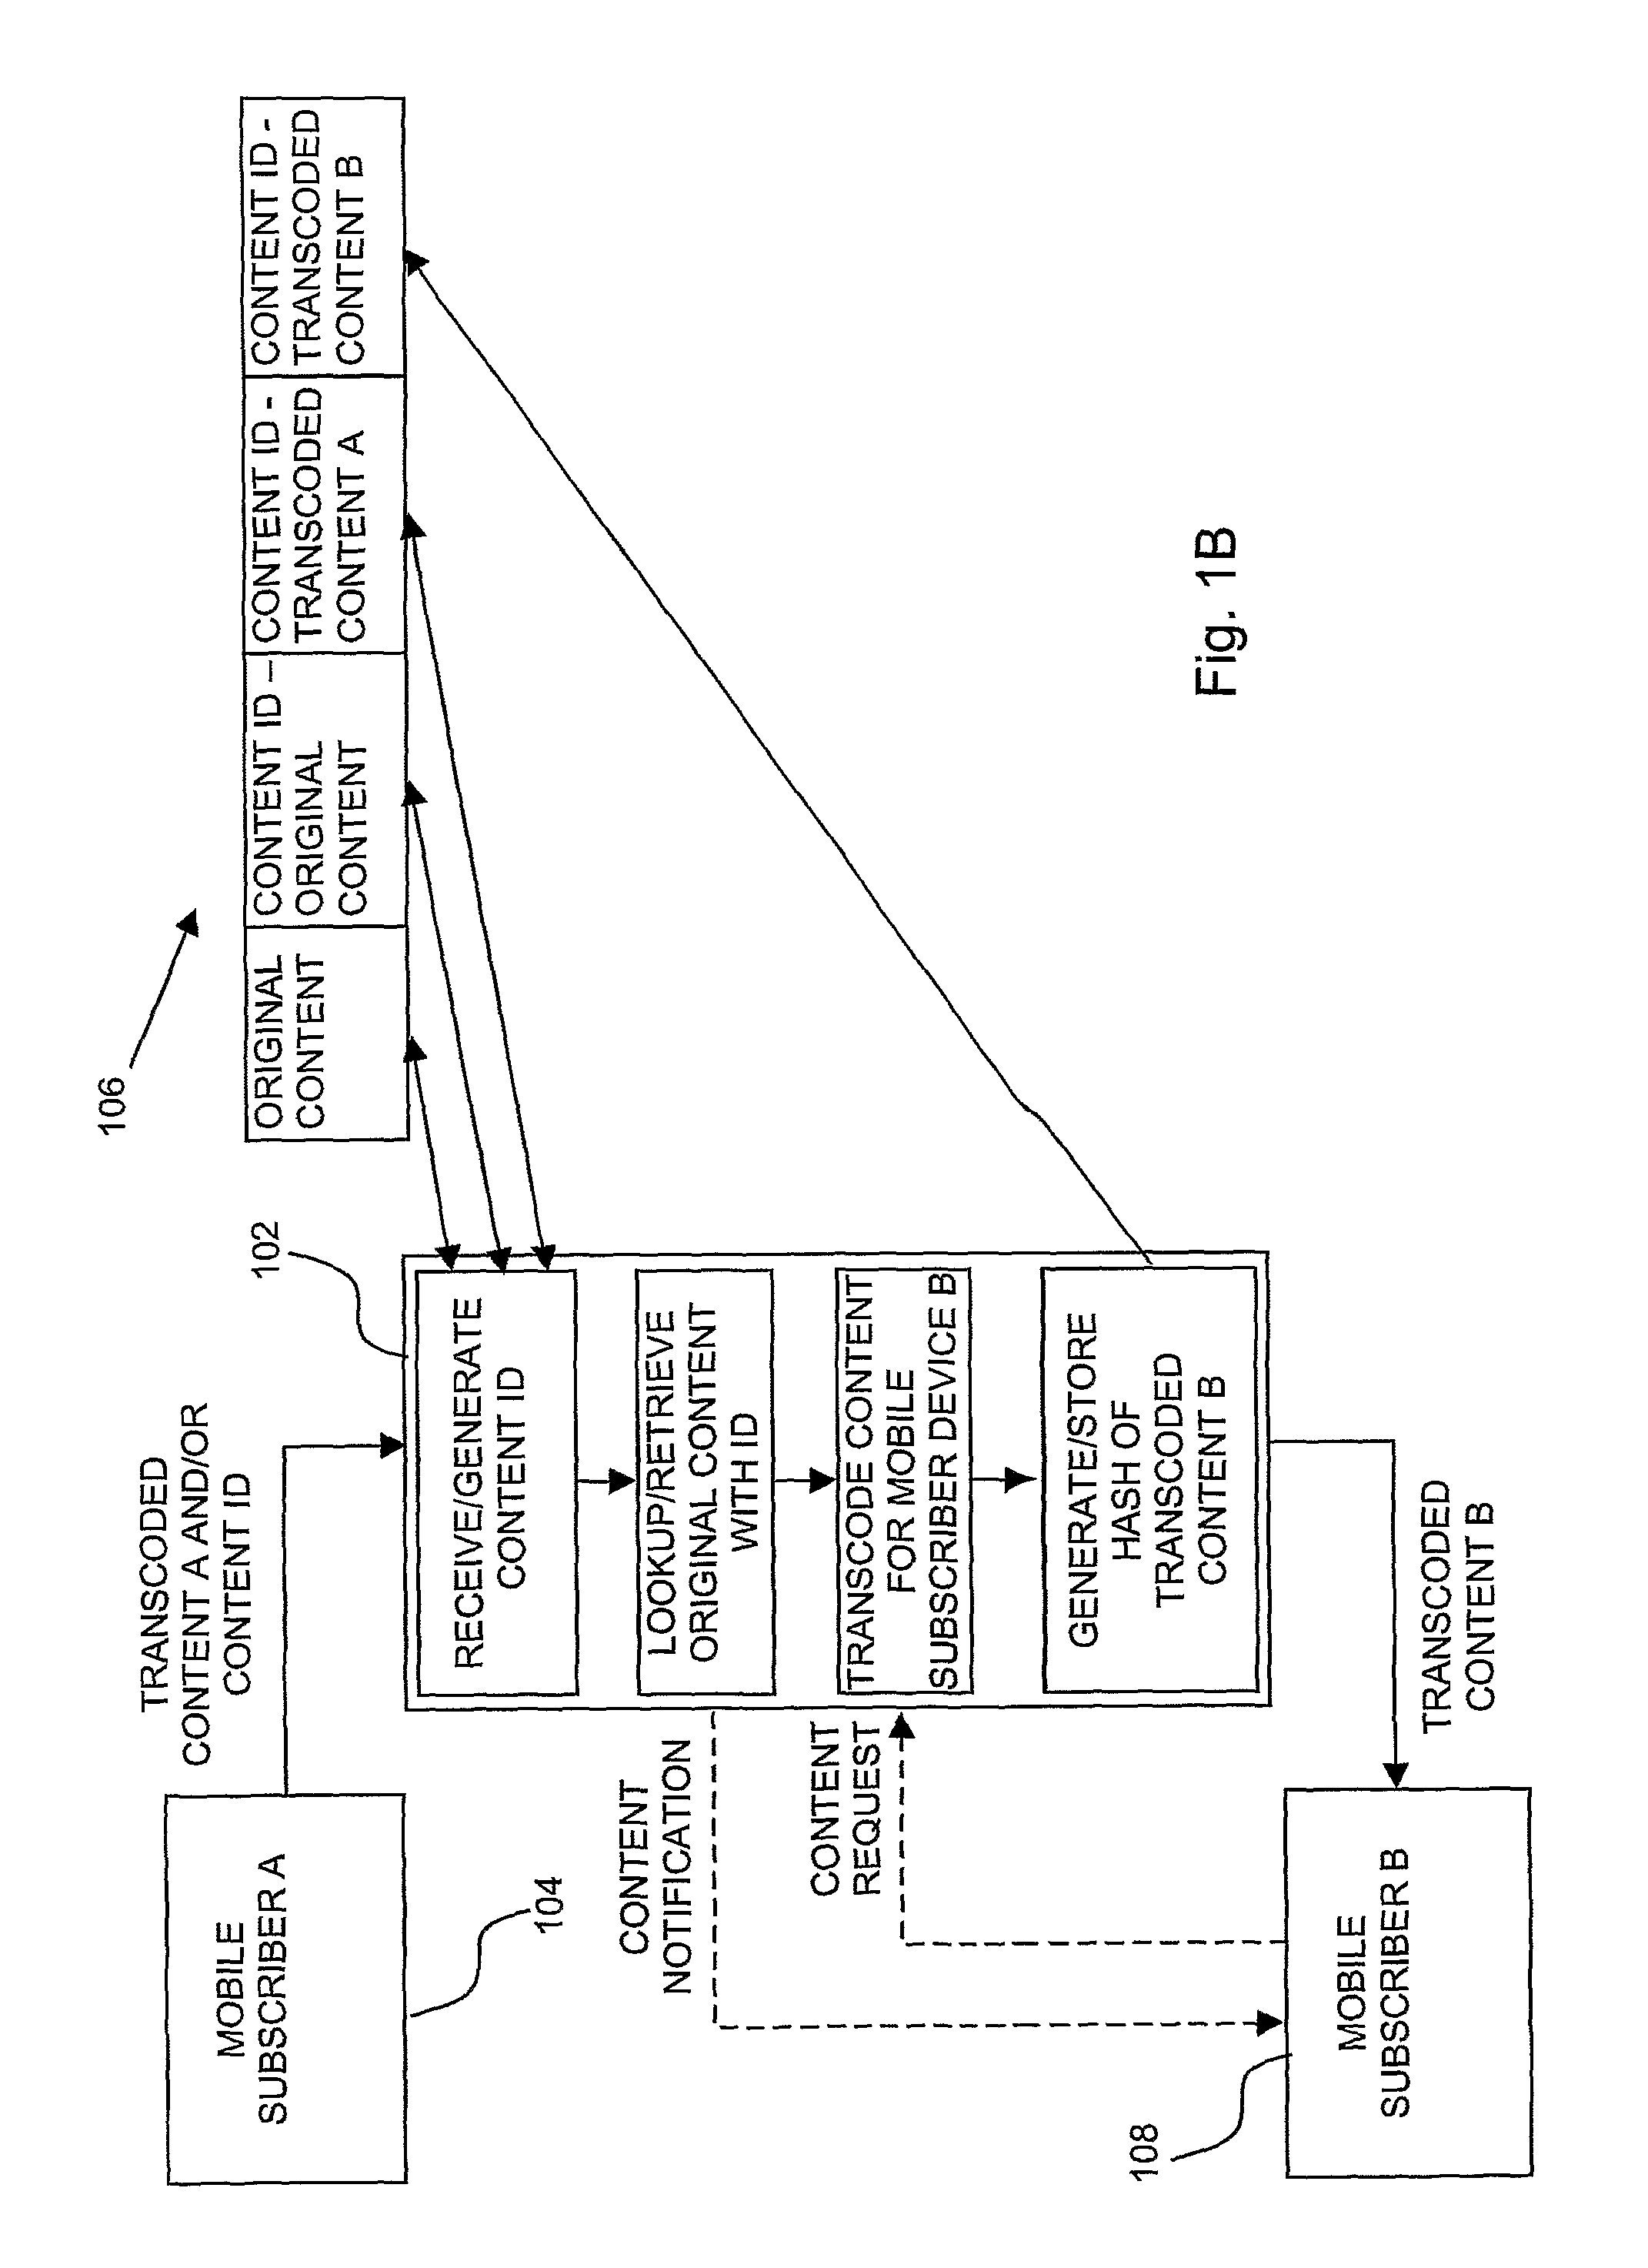 Optimally adapting multimedia content for mobile subscriber device playback